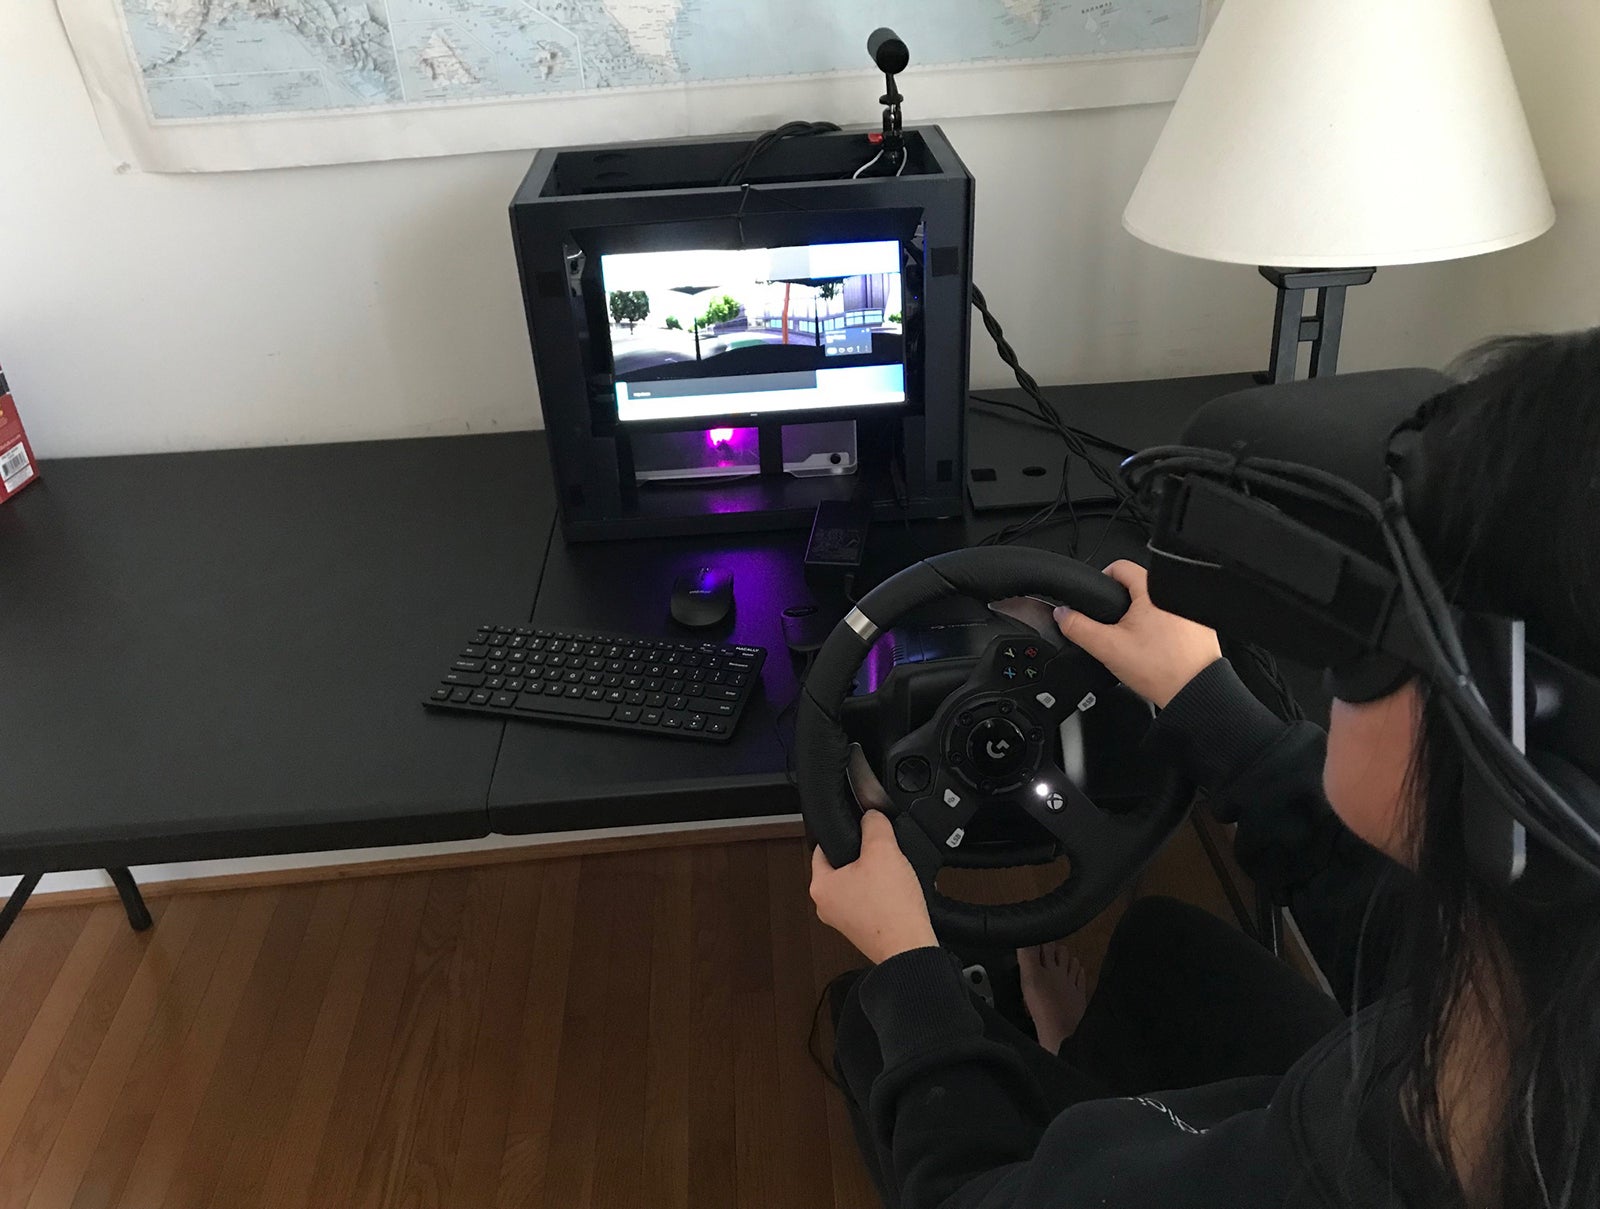 Driving Simulator Goes Virtual to Help More People With Autism